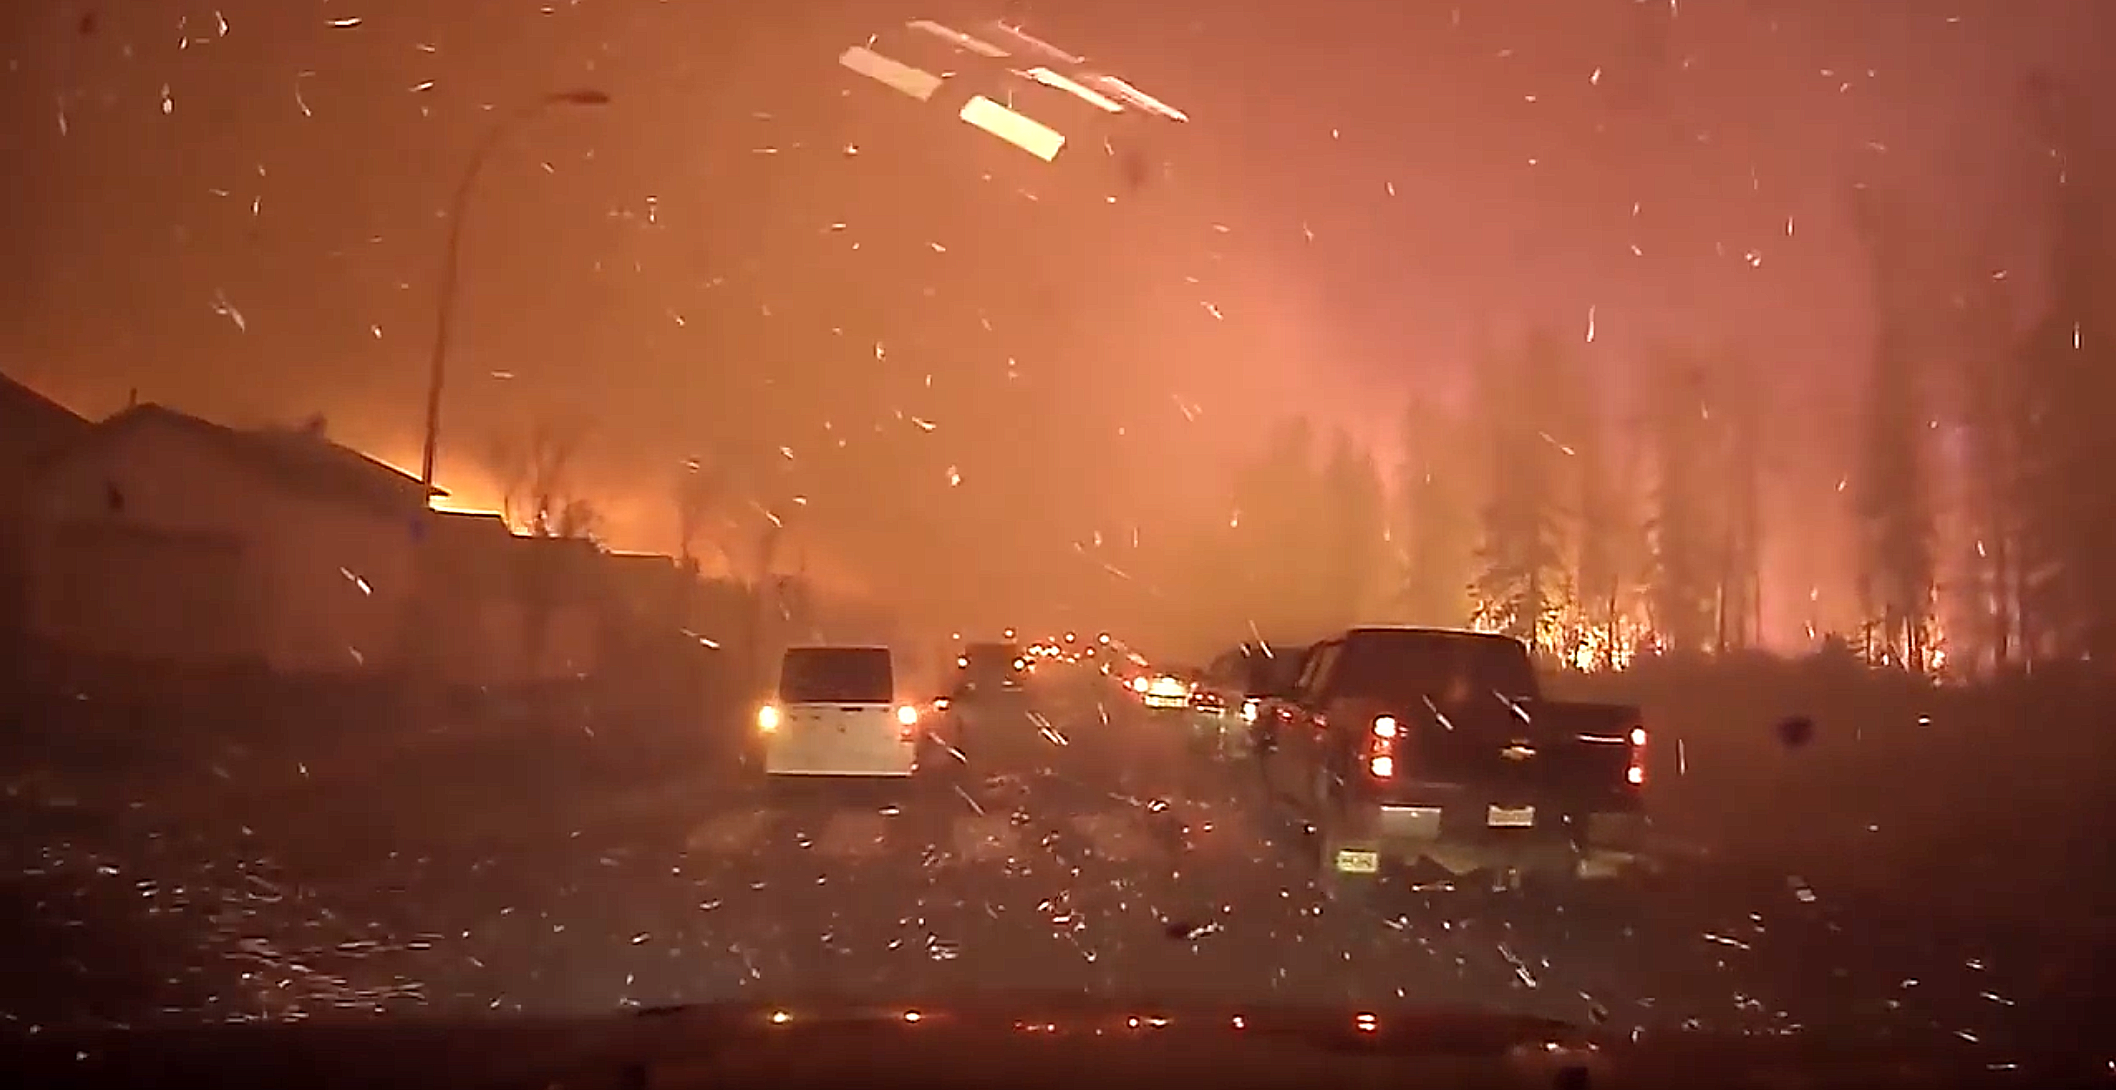 Christmas Miracle video 2016 Fort MacMurray wildfires